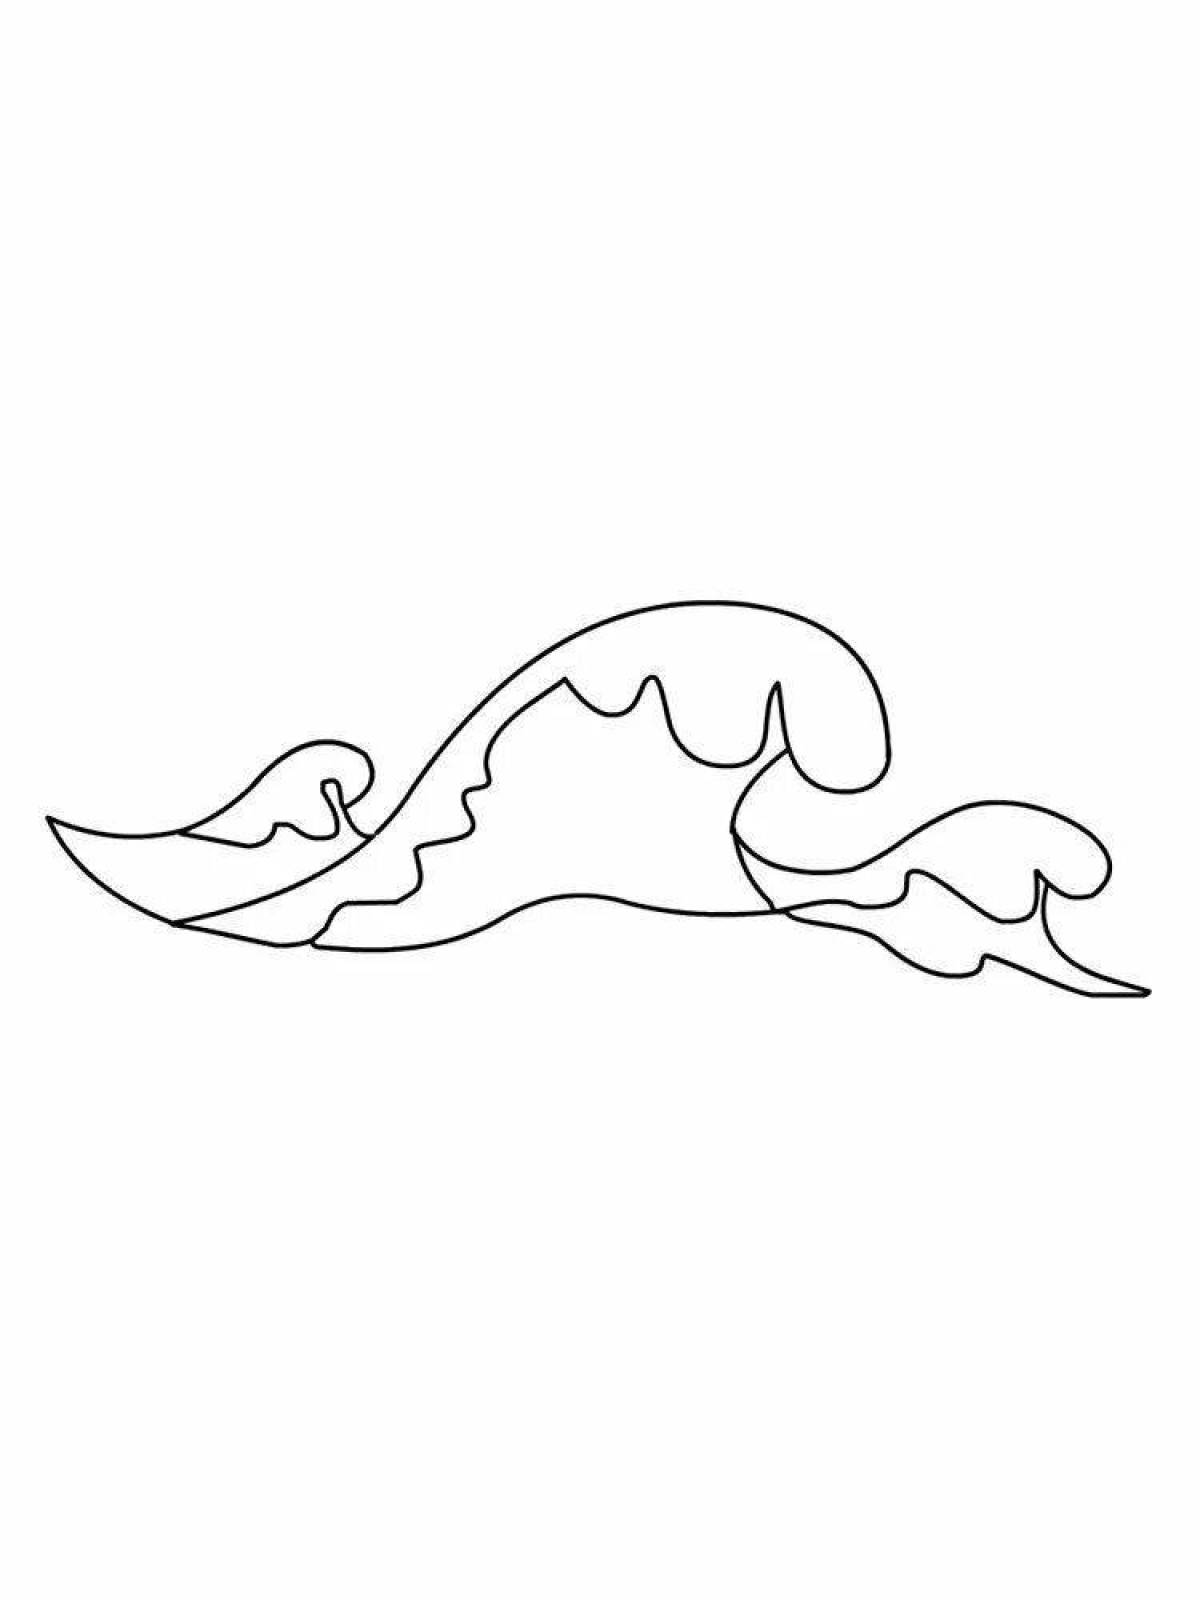 Sparkly waves coloring page